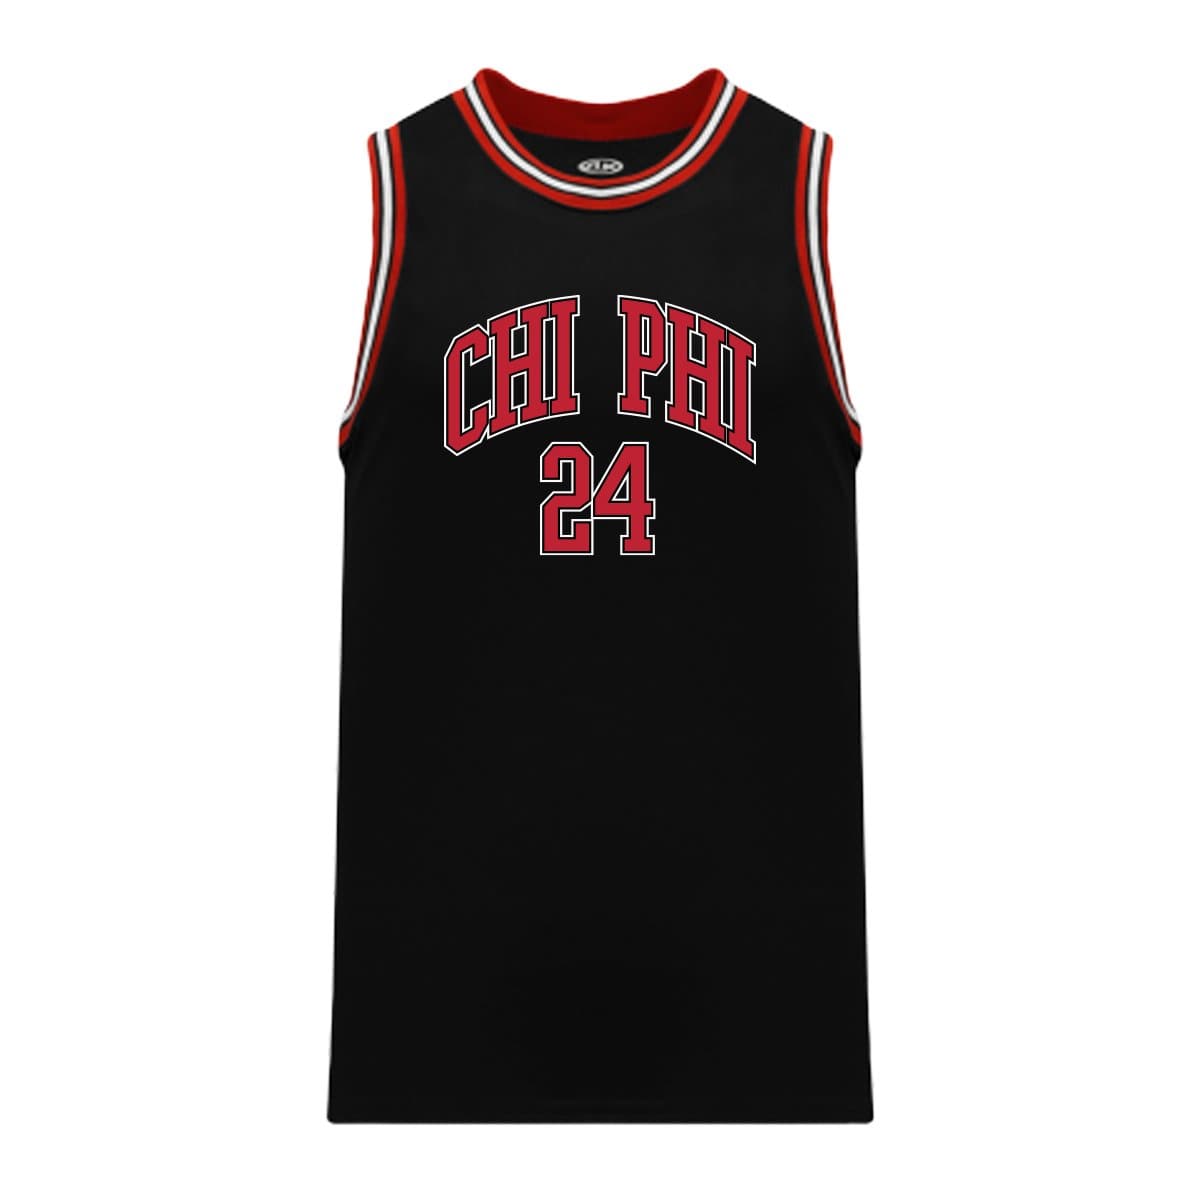 NBA Jerseys for sale in Indianapolis, Indiana